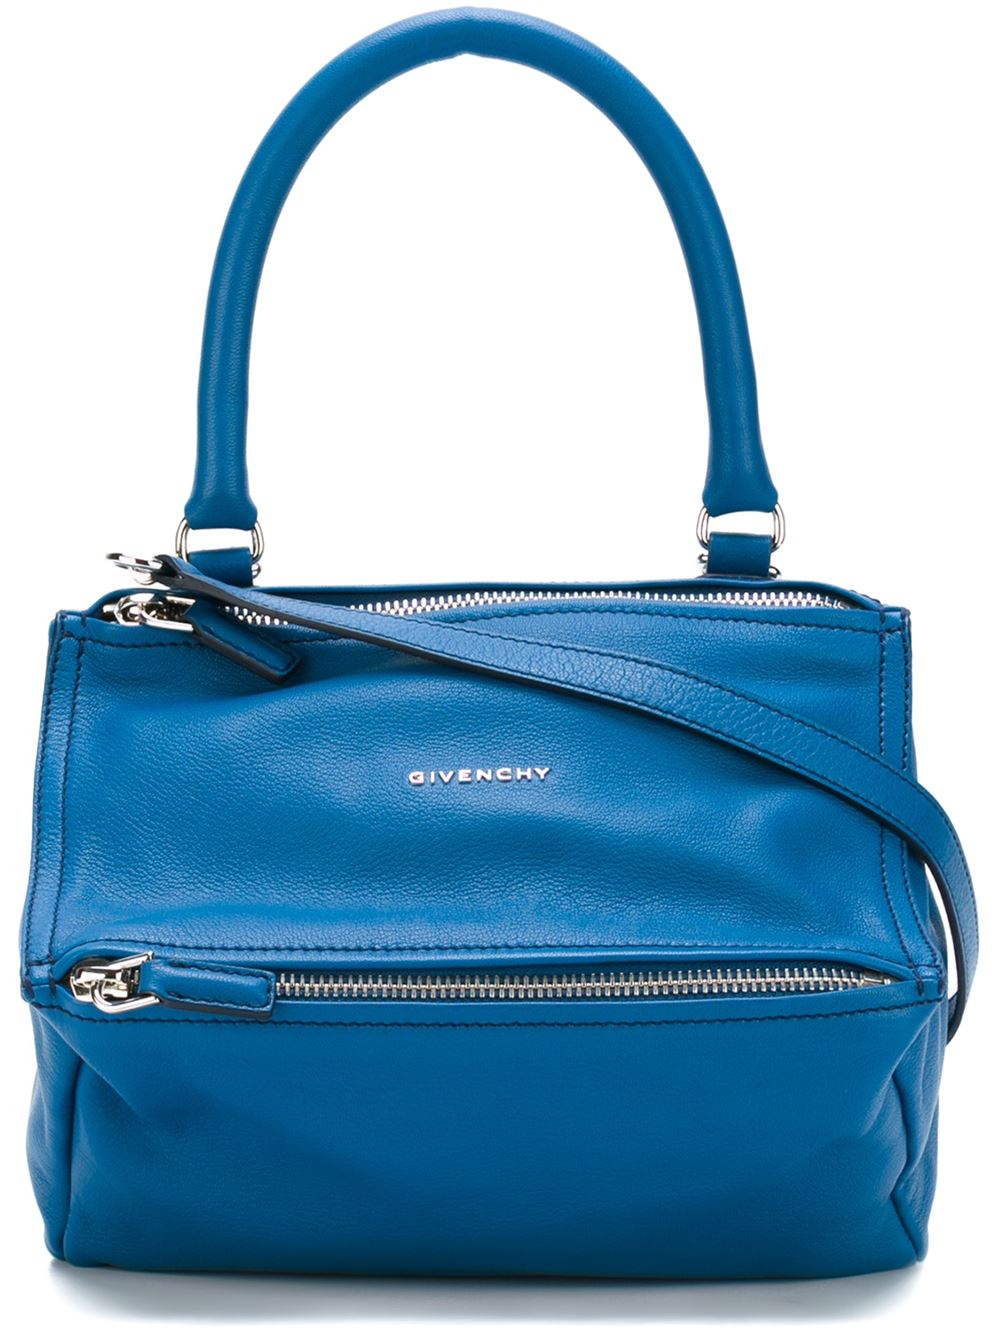 Givenchy Small Pandora Shoulder Bag in Blue | Lyst